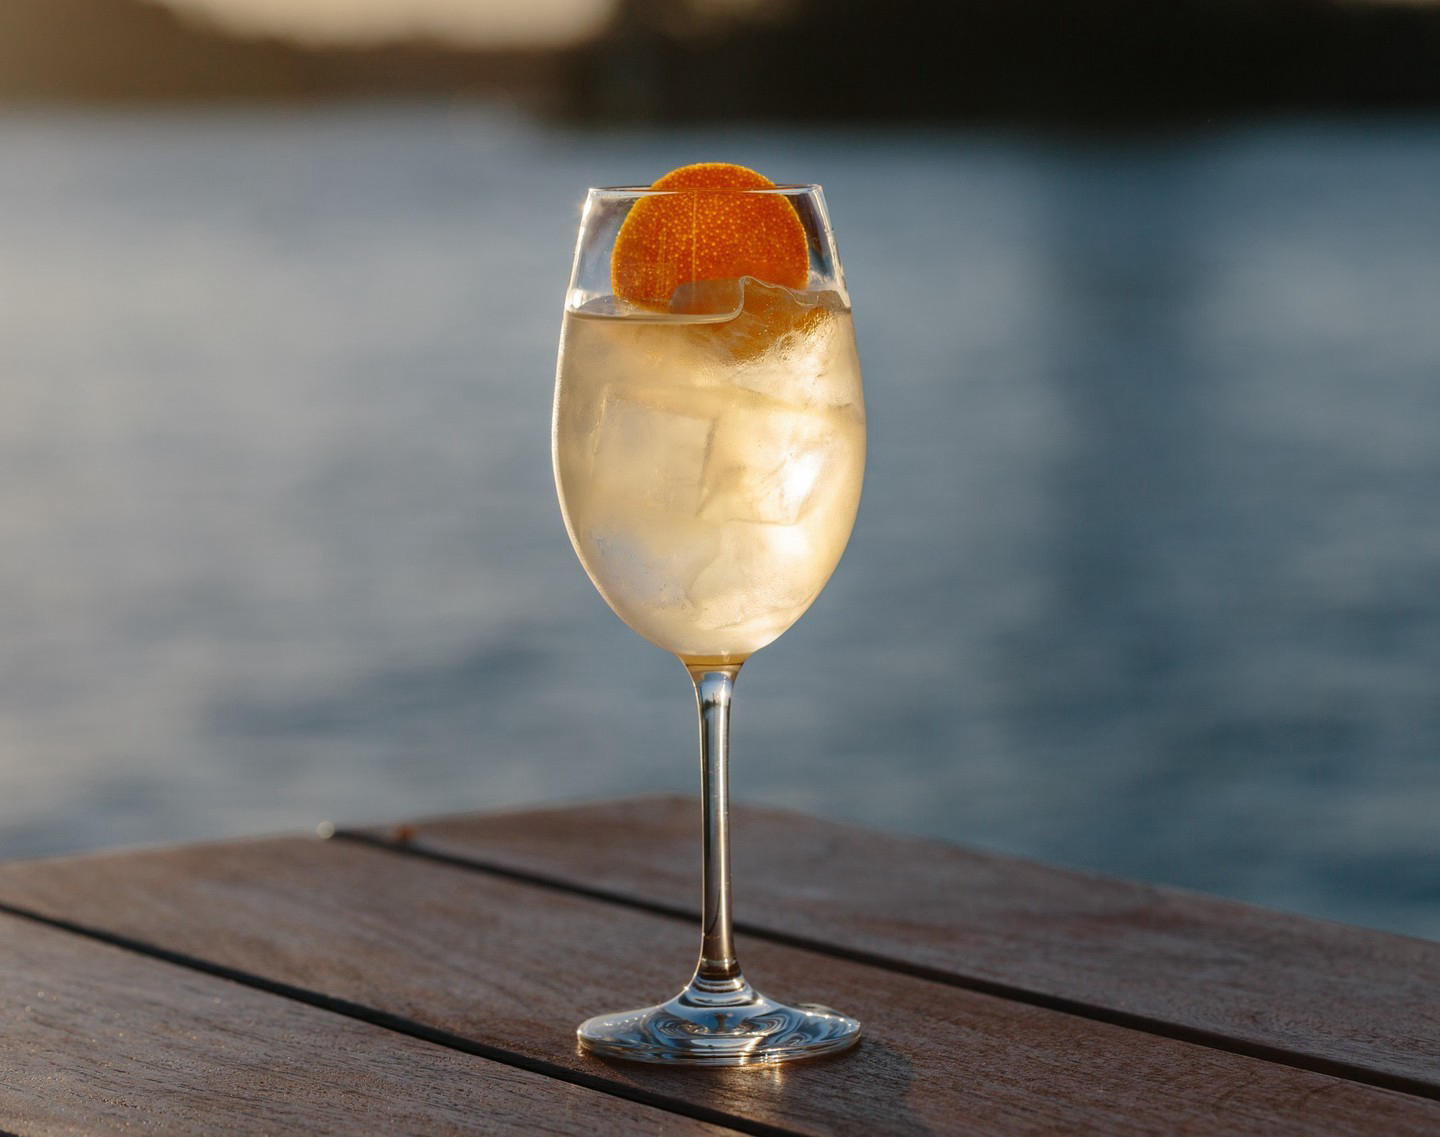 Pier One Sydney Harbour - A sunset staple here at the pier, the Sunset Spritz